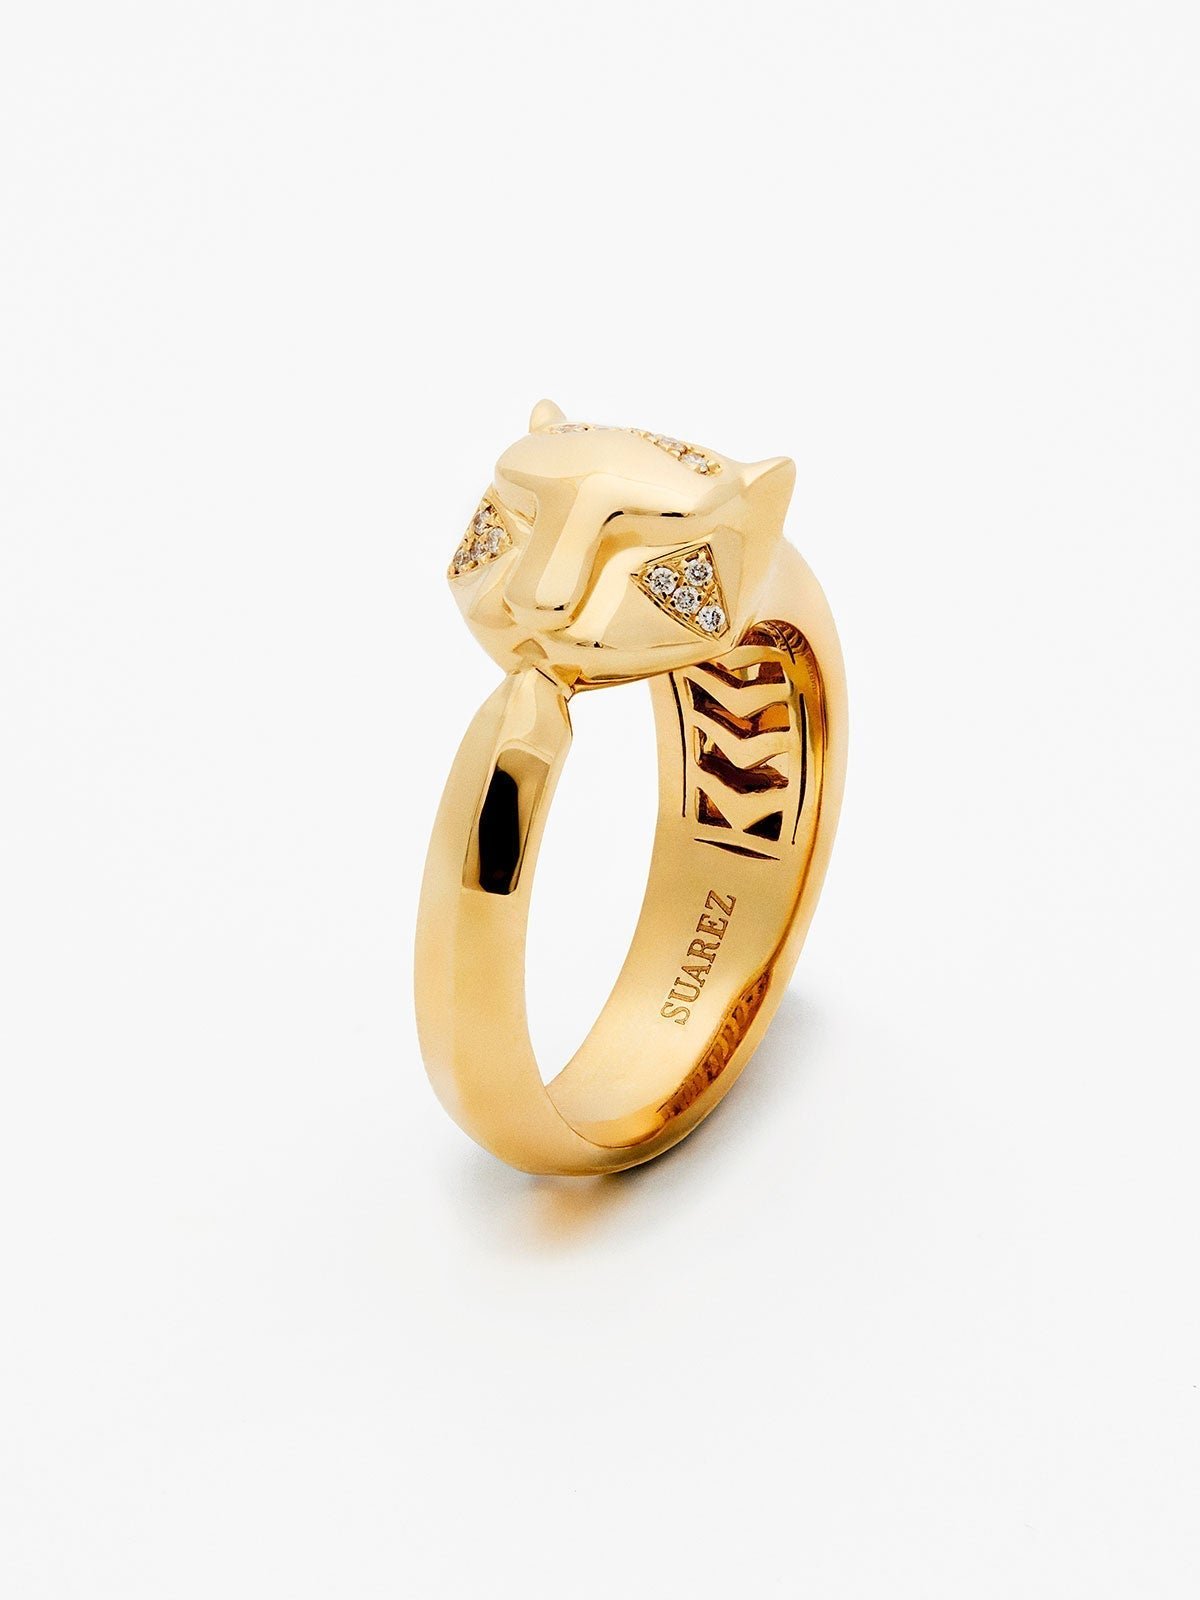 18K yellow gold ring with 0.08 ct brilliant cut diamonds in the shape of a tiger